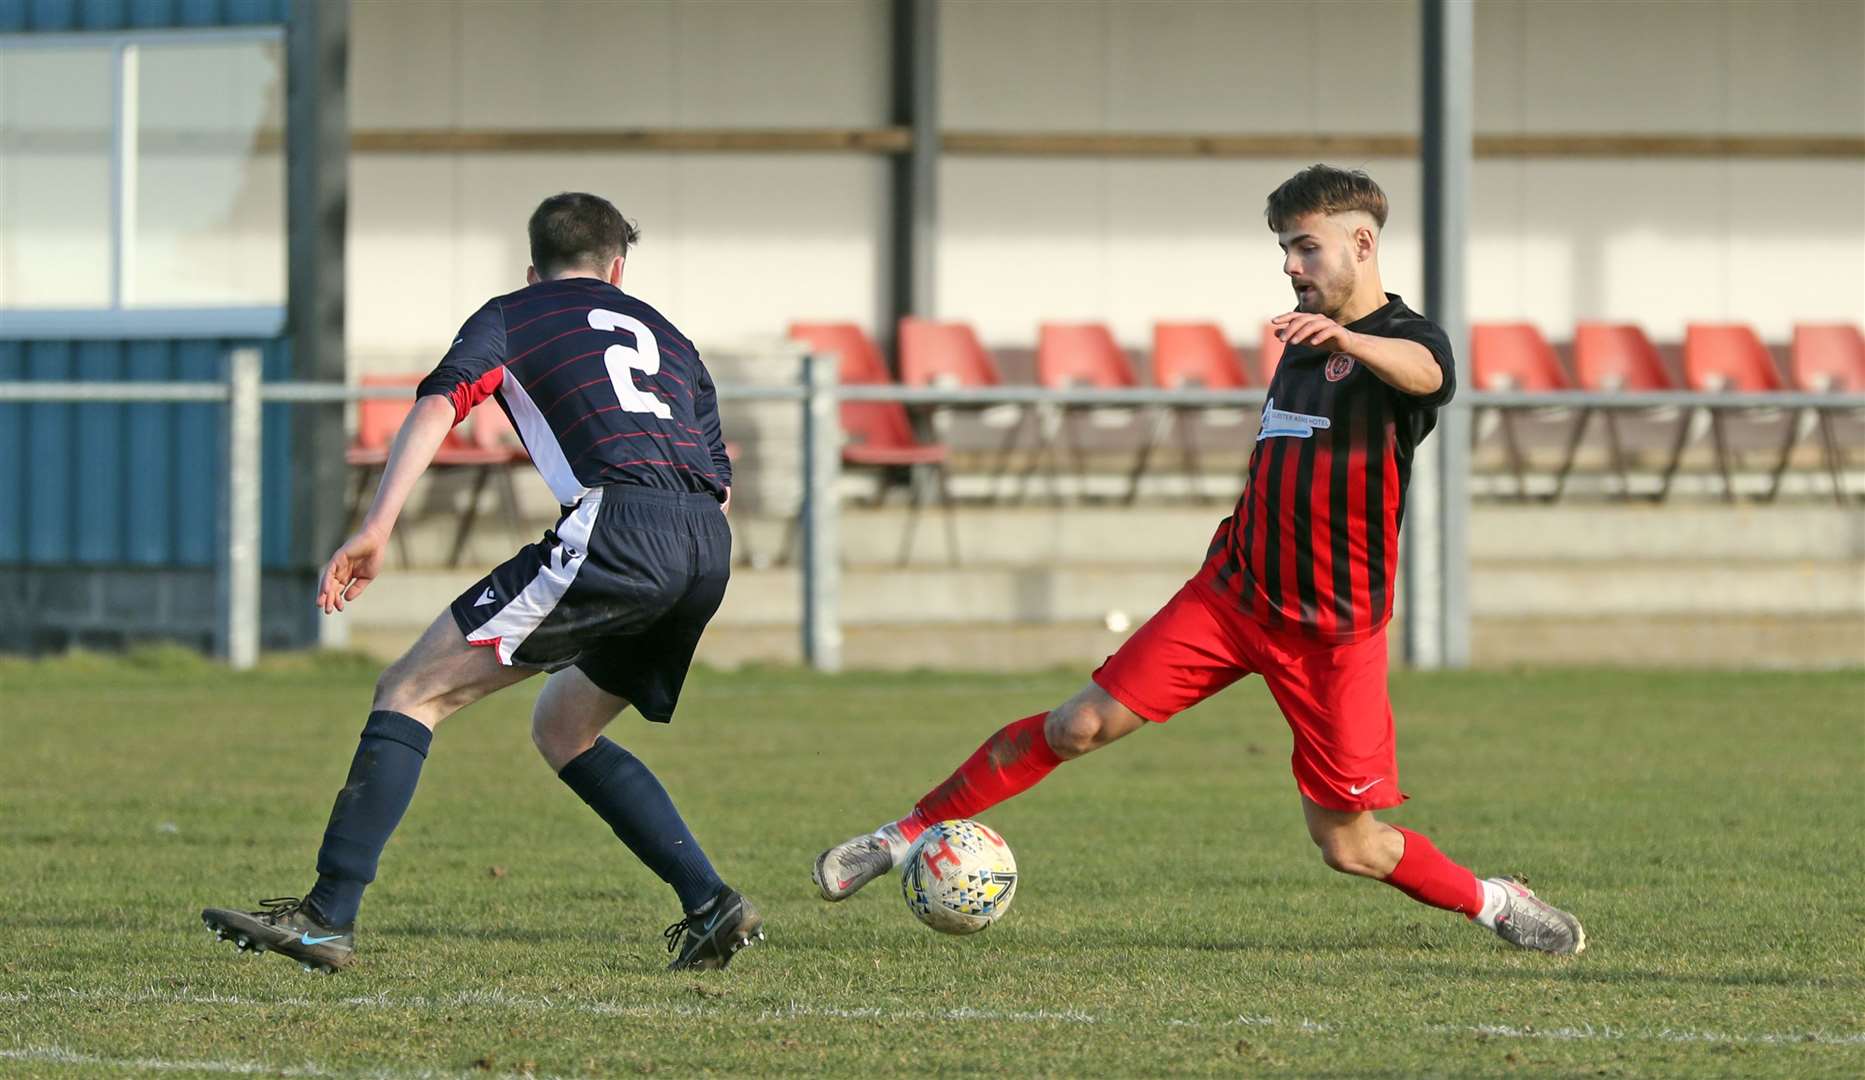 Halkirk United striker Jonah Martens tries to get past Cal White of Inverness Athletic. Picture: James Gunn